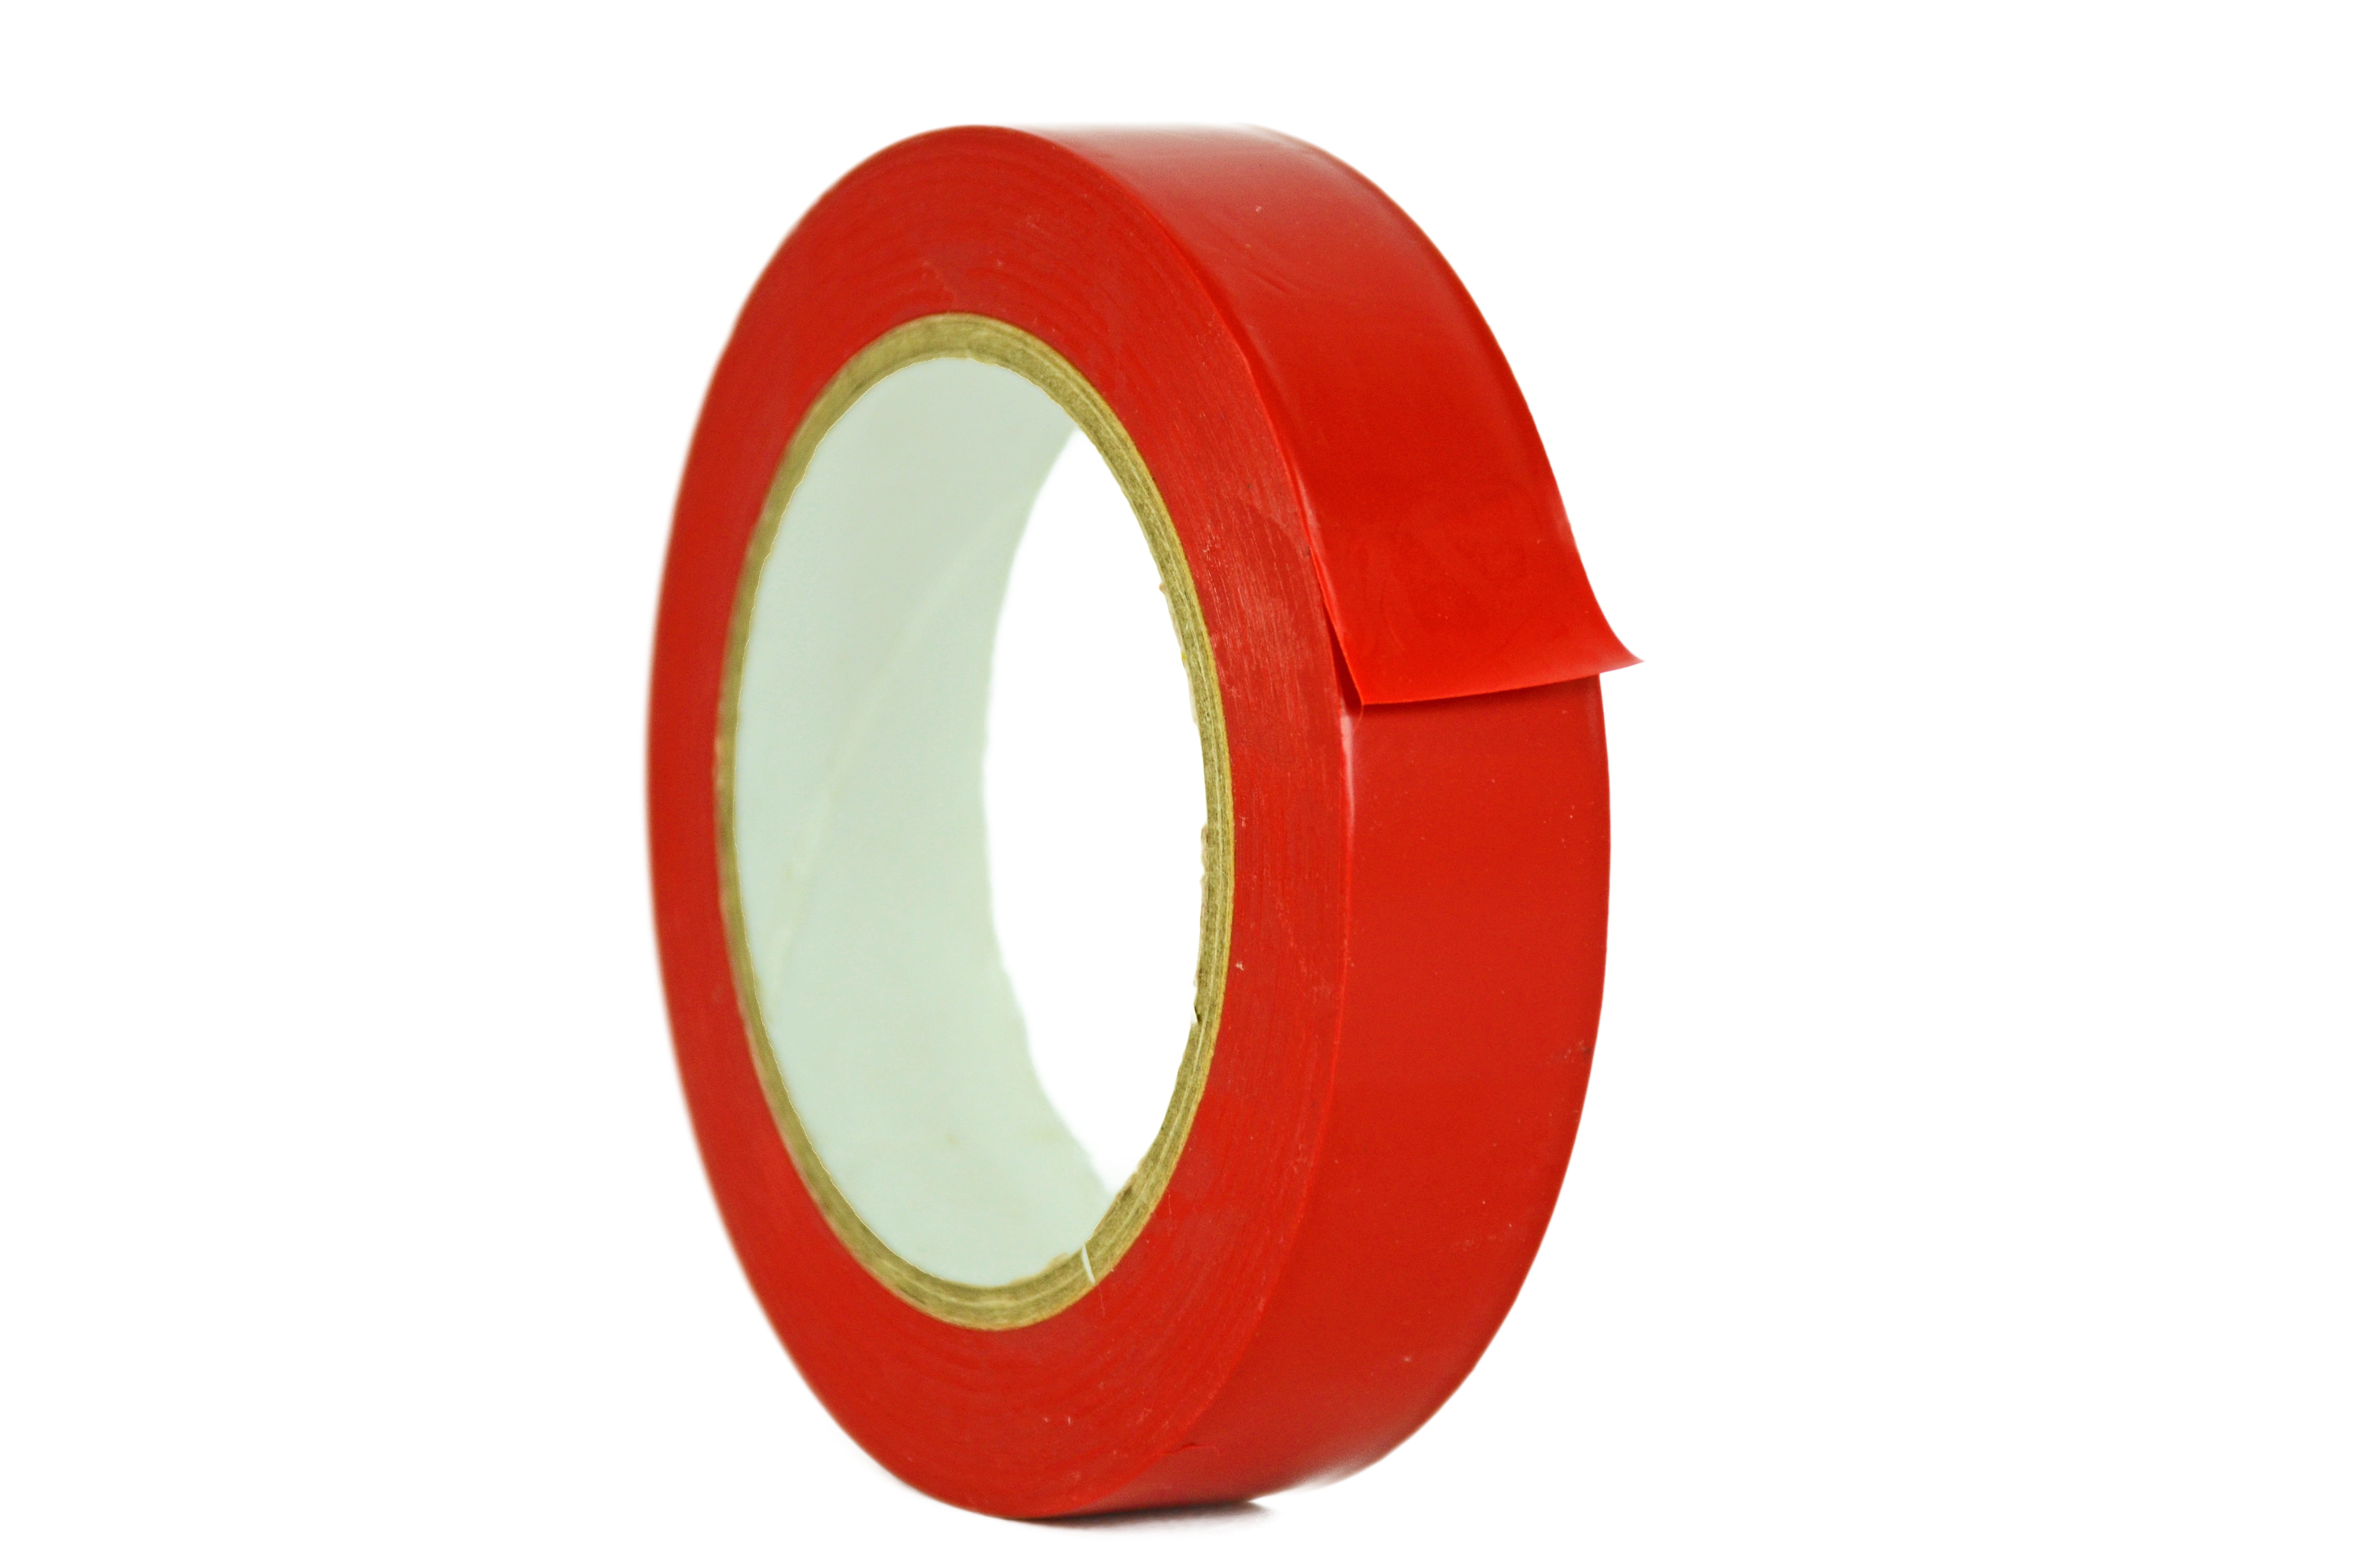 WOD GPM-63 Masking Tape 1/2 inch for General Purpose / Painting